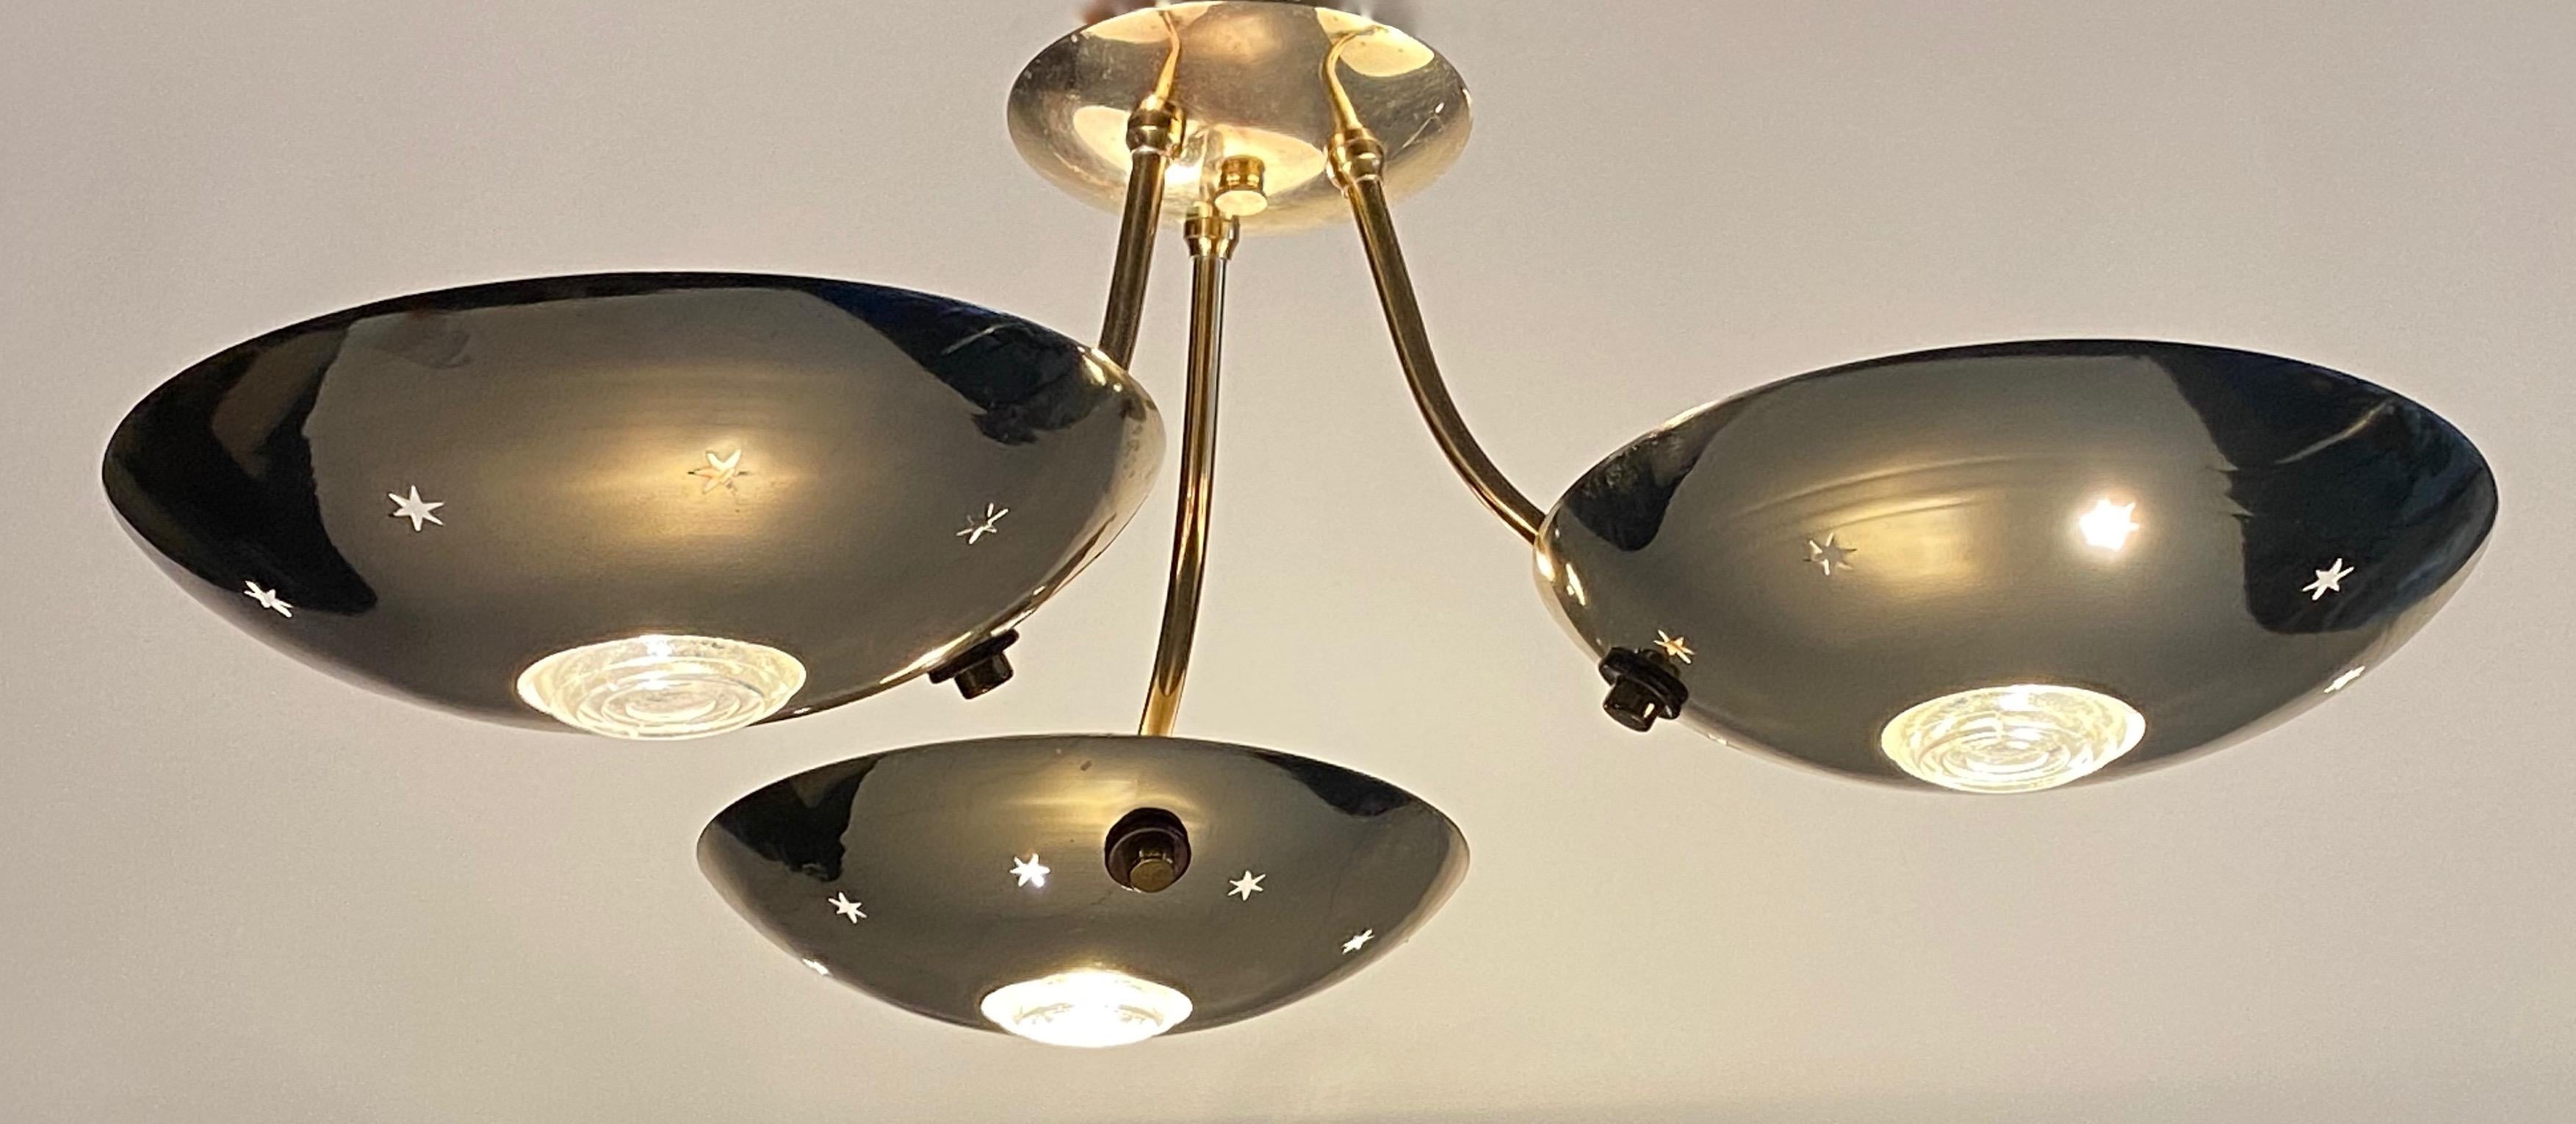 Lightolier ceiling fixture comprised of three perforated with star patterns round discus with round glass inserts with concentric circles in the center and constructed of brass.  Finnish designer Paavo Viljo Tynell did a number of designs for the